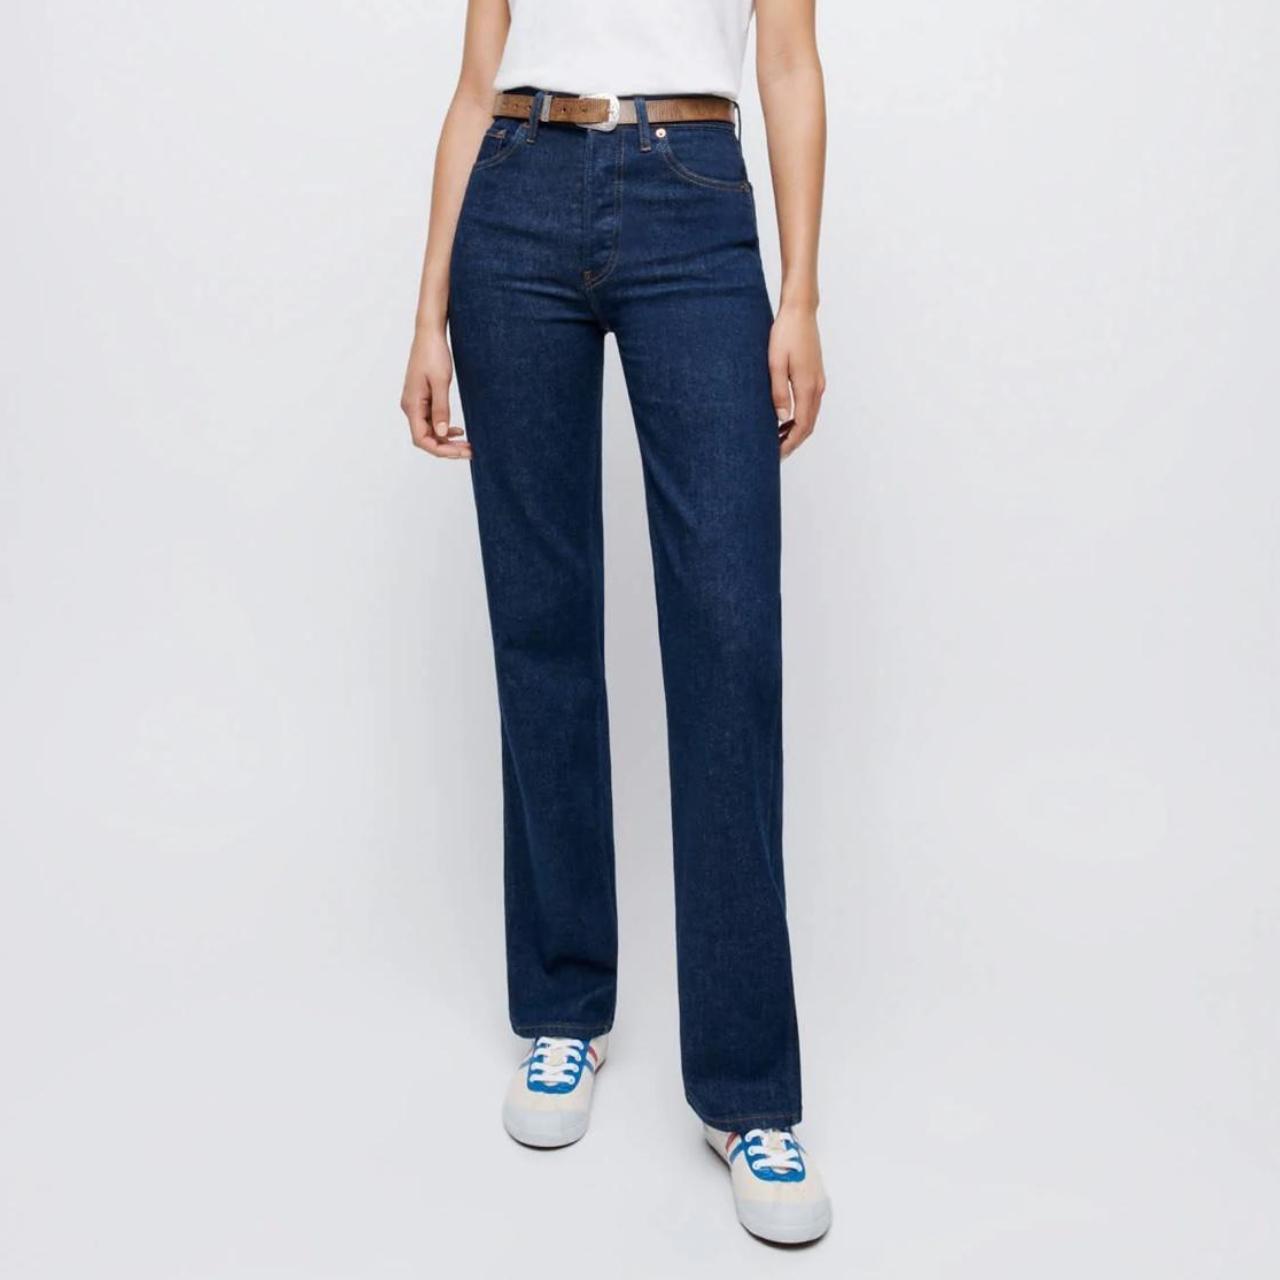 RE/DONE Women's Navy Jeans